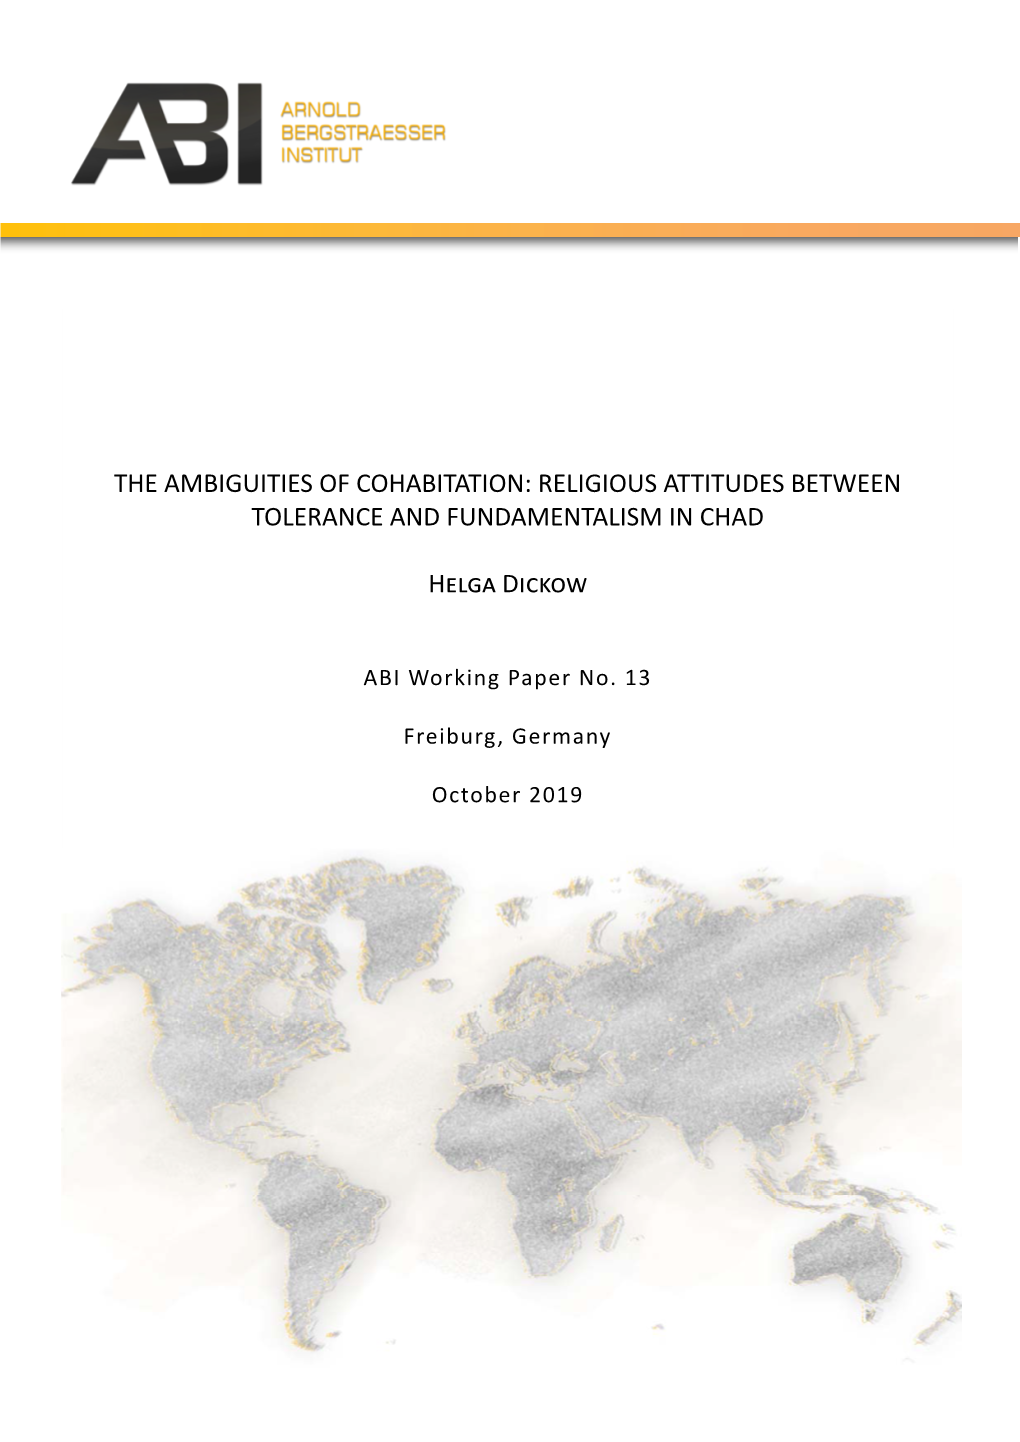 The Ambiguities of Cohabitation: Religious Attitudes Between Tolerance and Fundamentalism in Chad